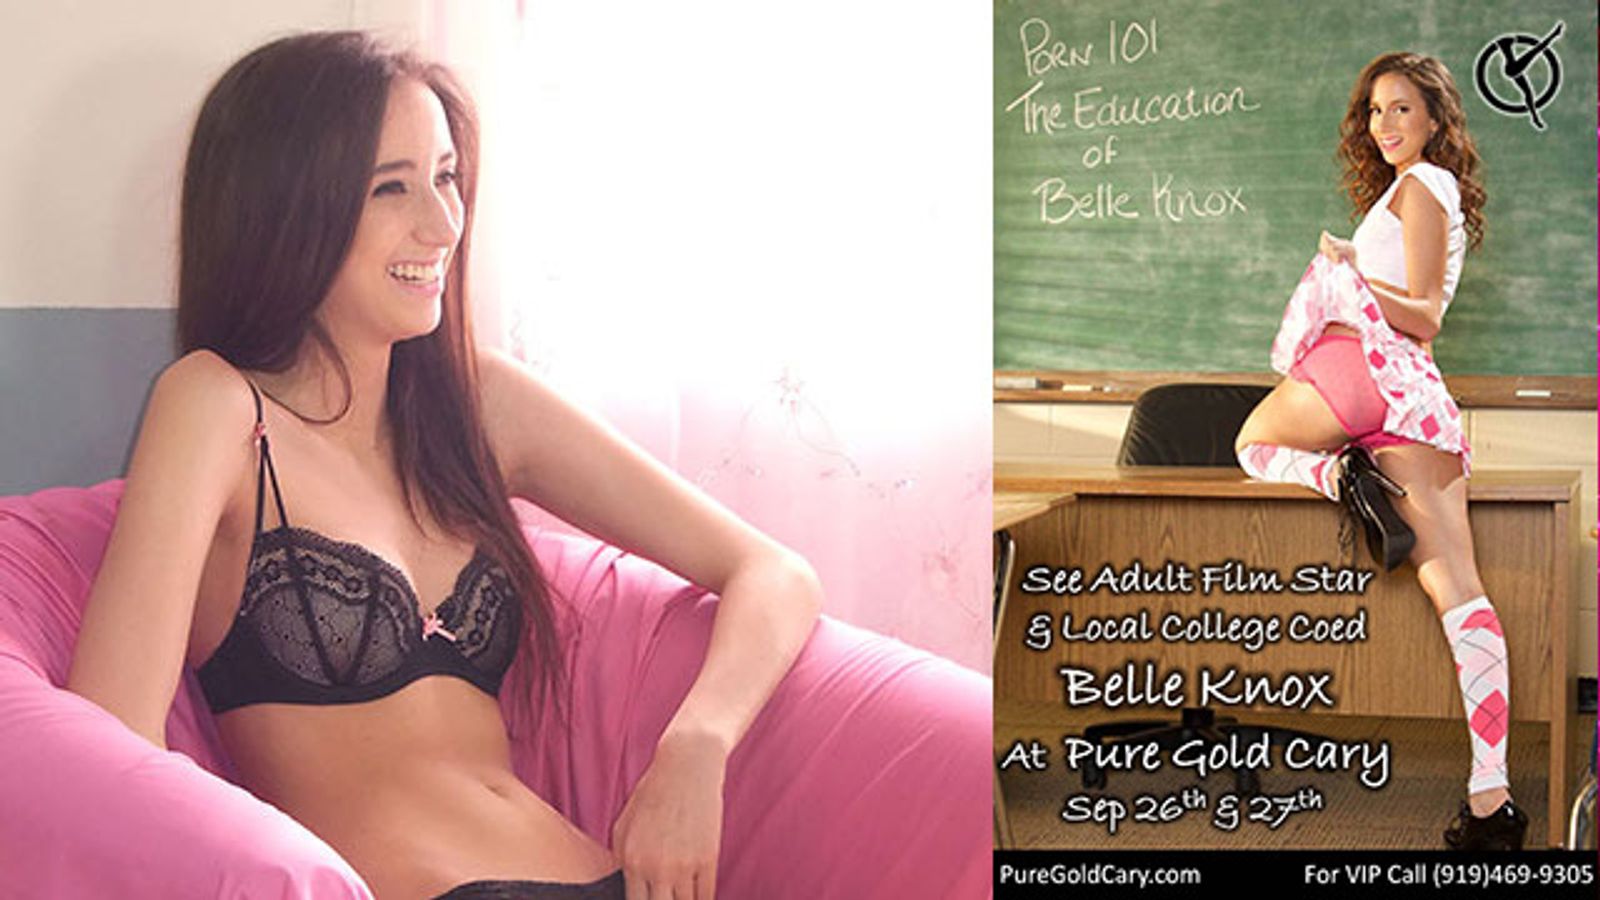 Belle Knox Features at Pure Gold in Cary, NC September 26-7